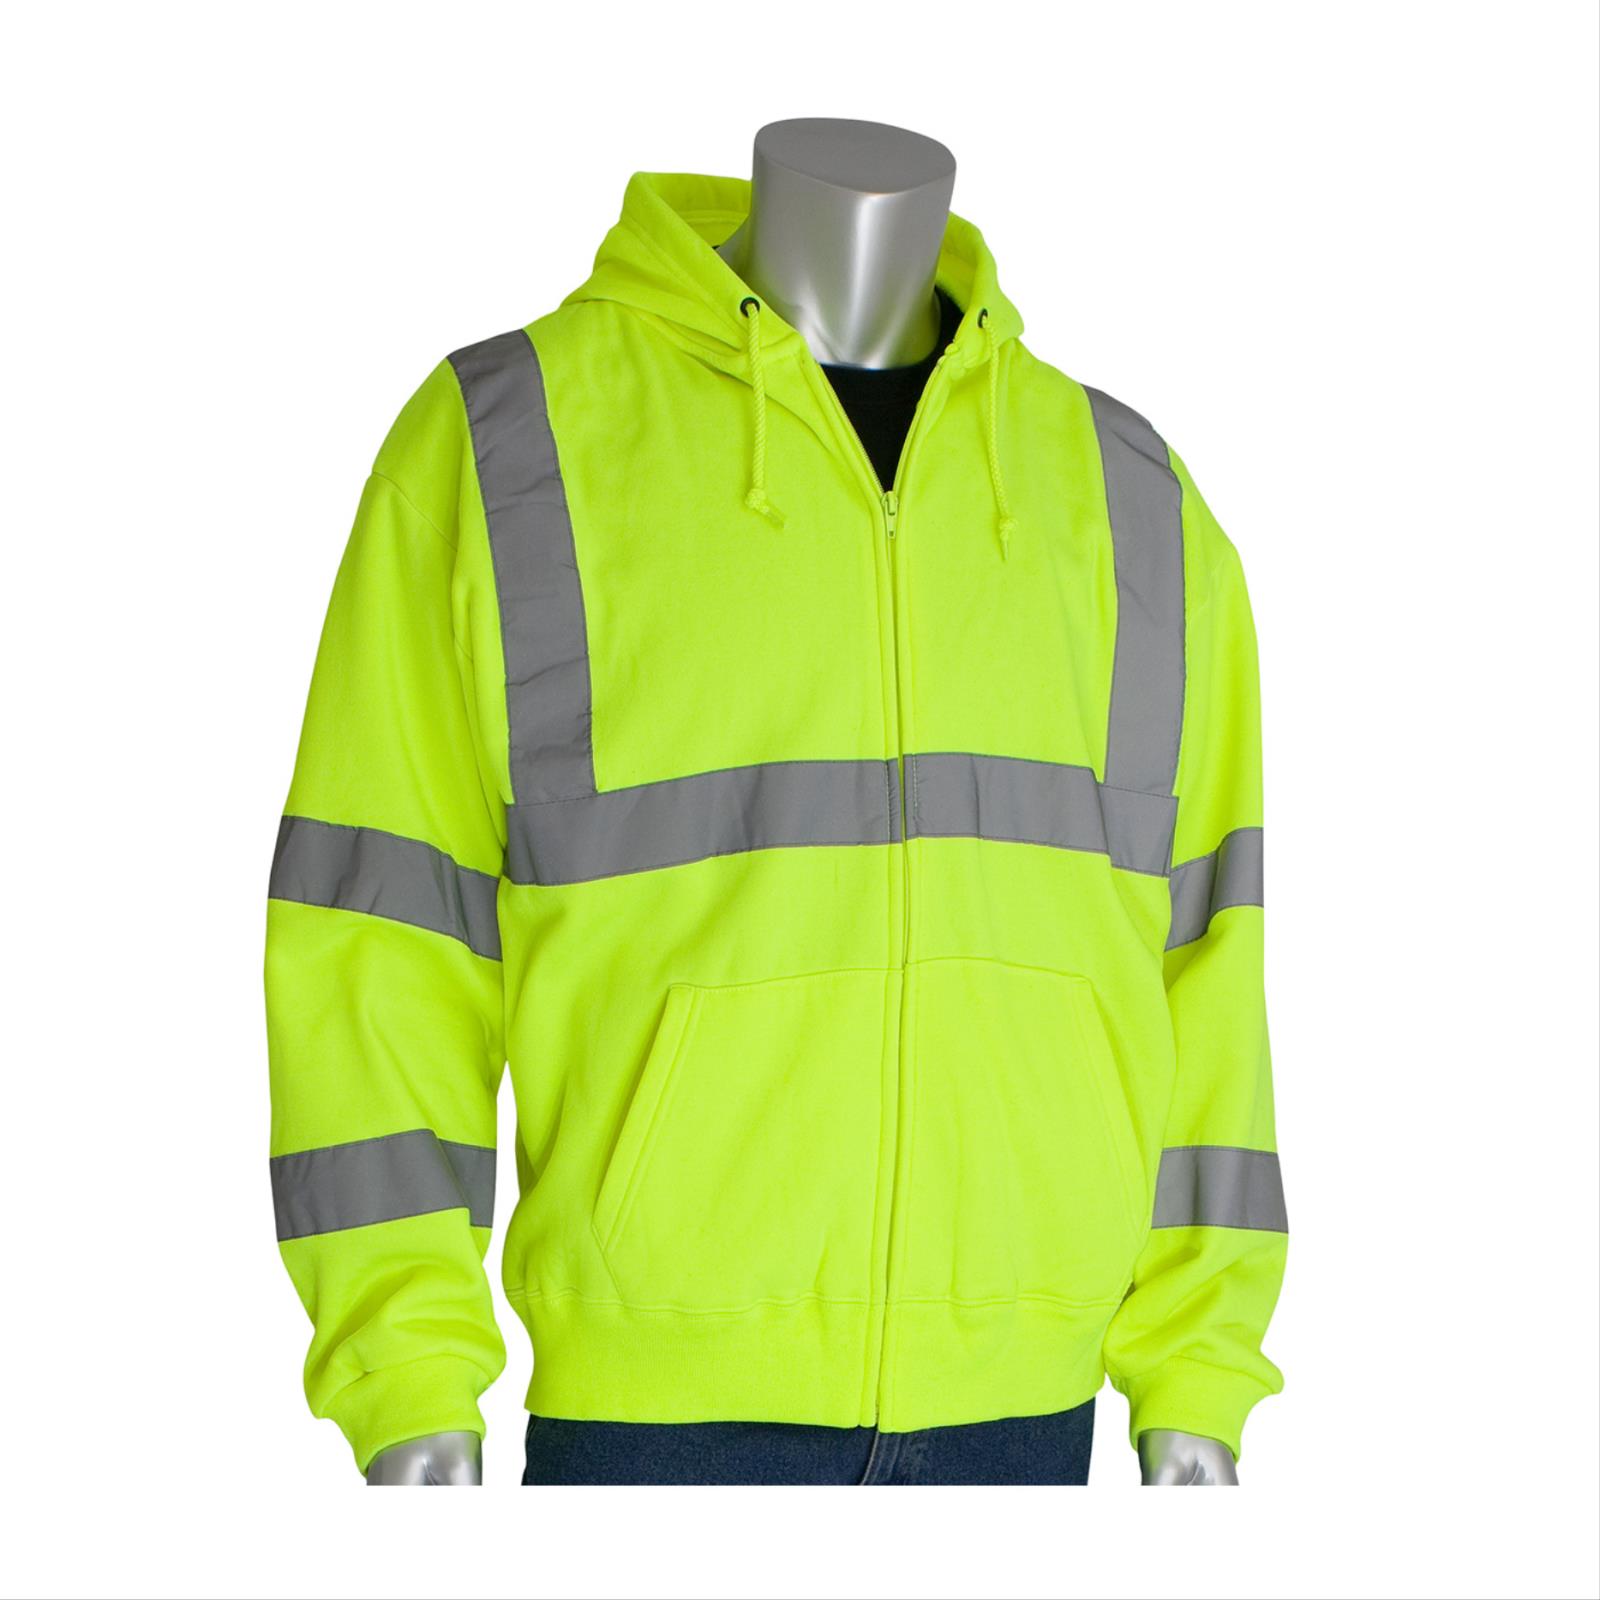 Safety Products Inc - Hooded Sweatshirt, Class 3 Type R